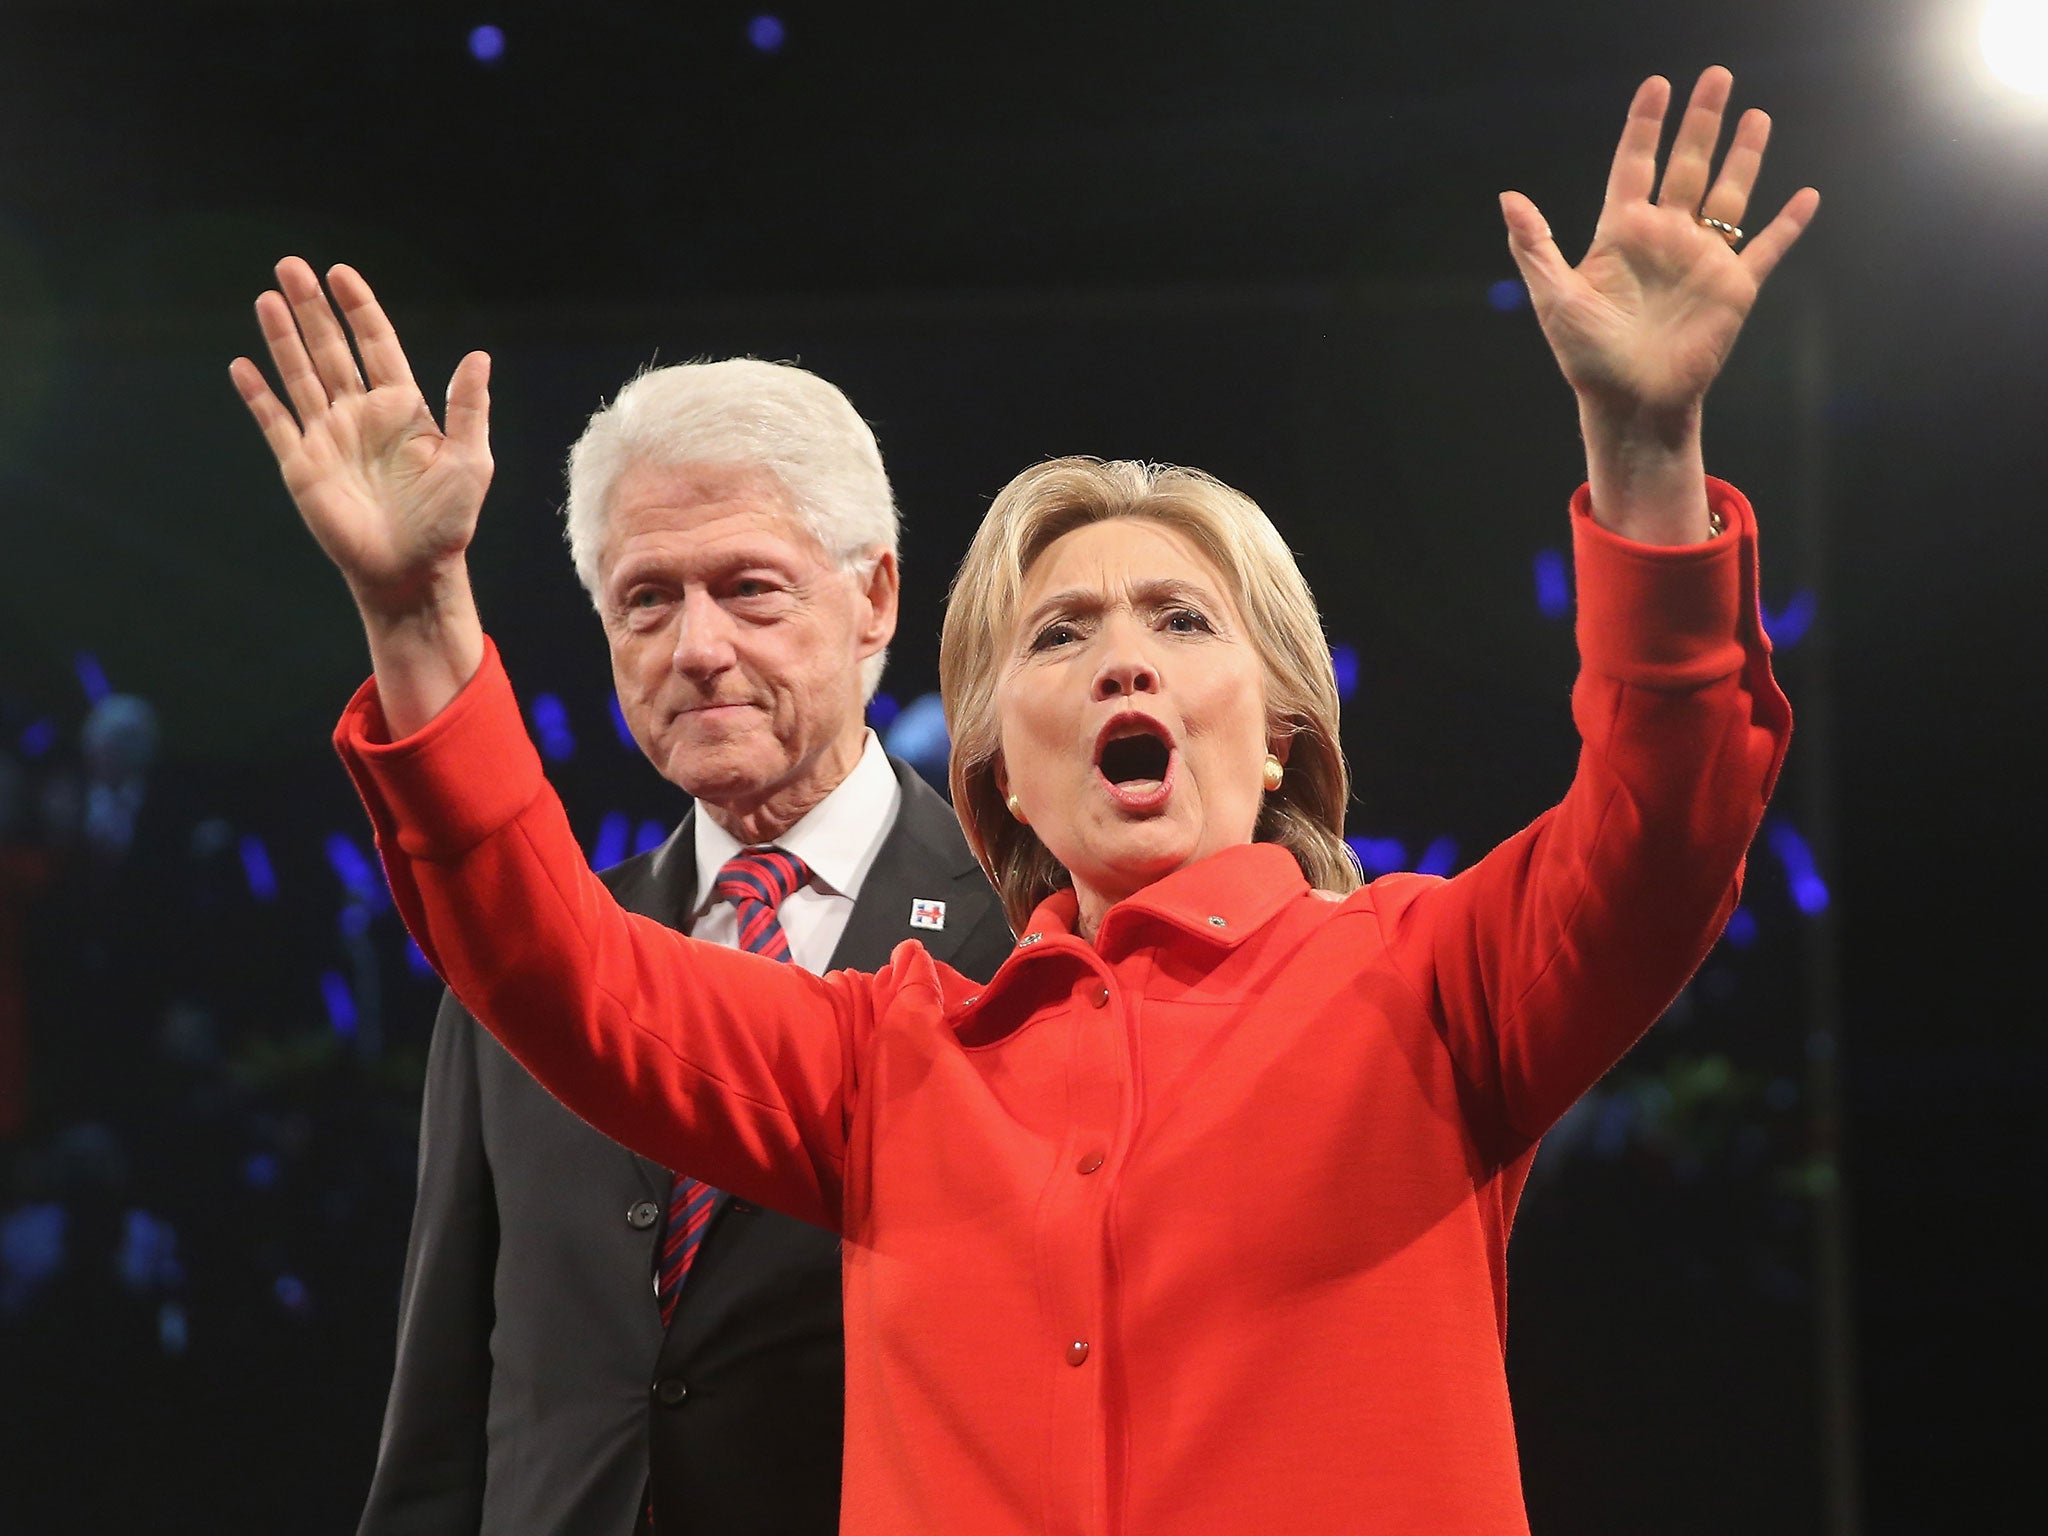 Hillary Clinton is relying on Bill’s charisma and his abilities as a fundraiser